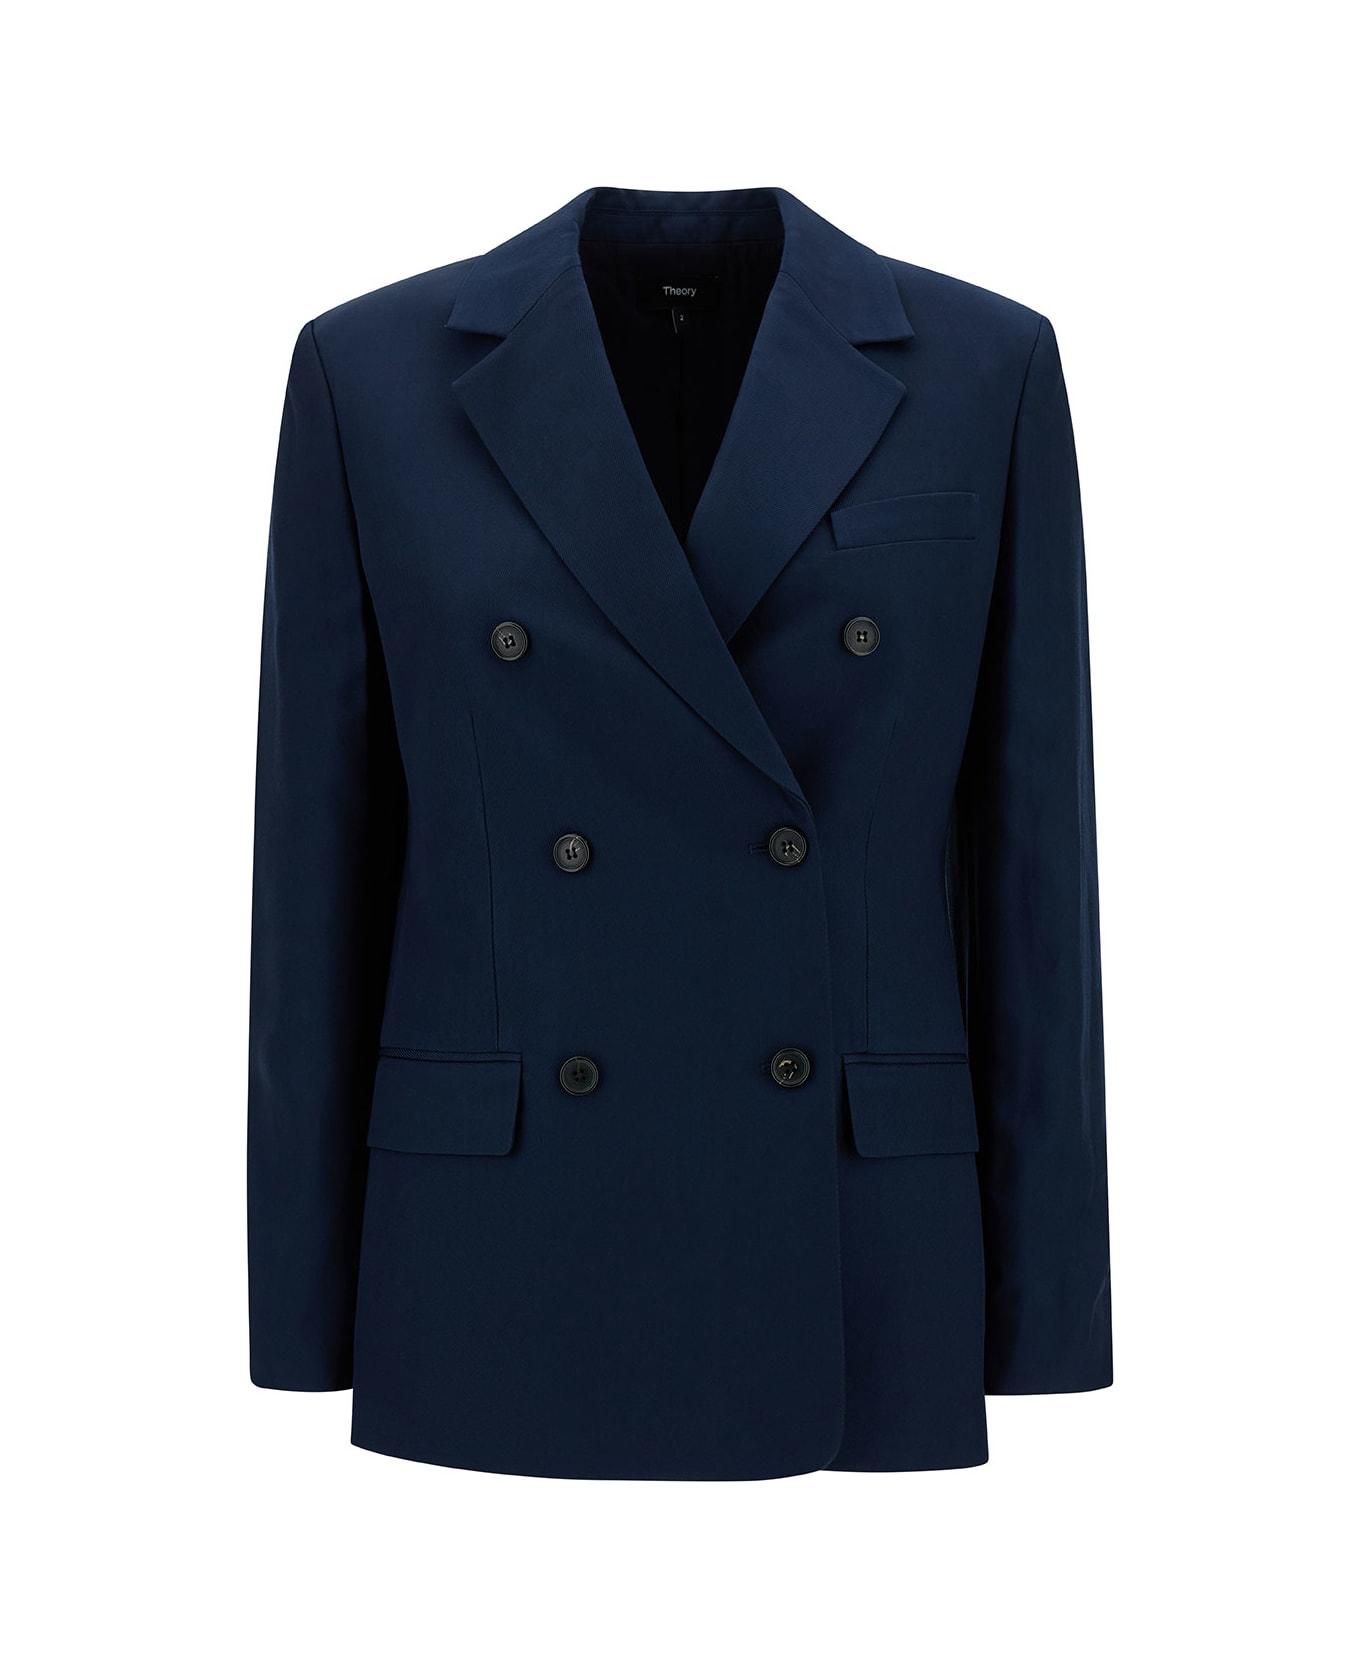 Theory Blue Double-breasted Jacket With Notched Revers In Viscose Woman - Blu ブレザー